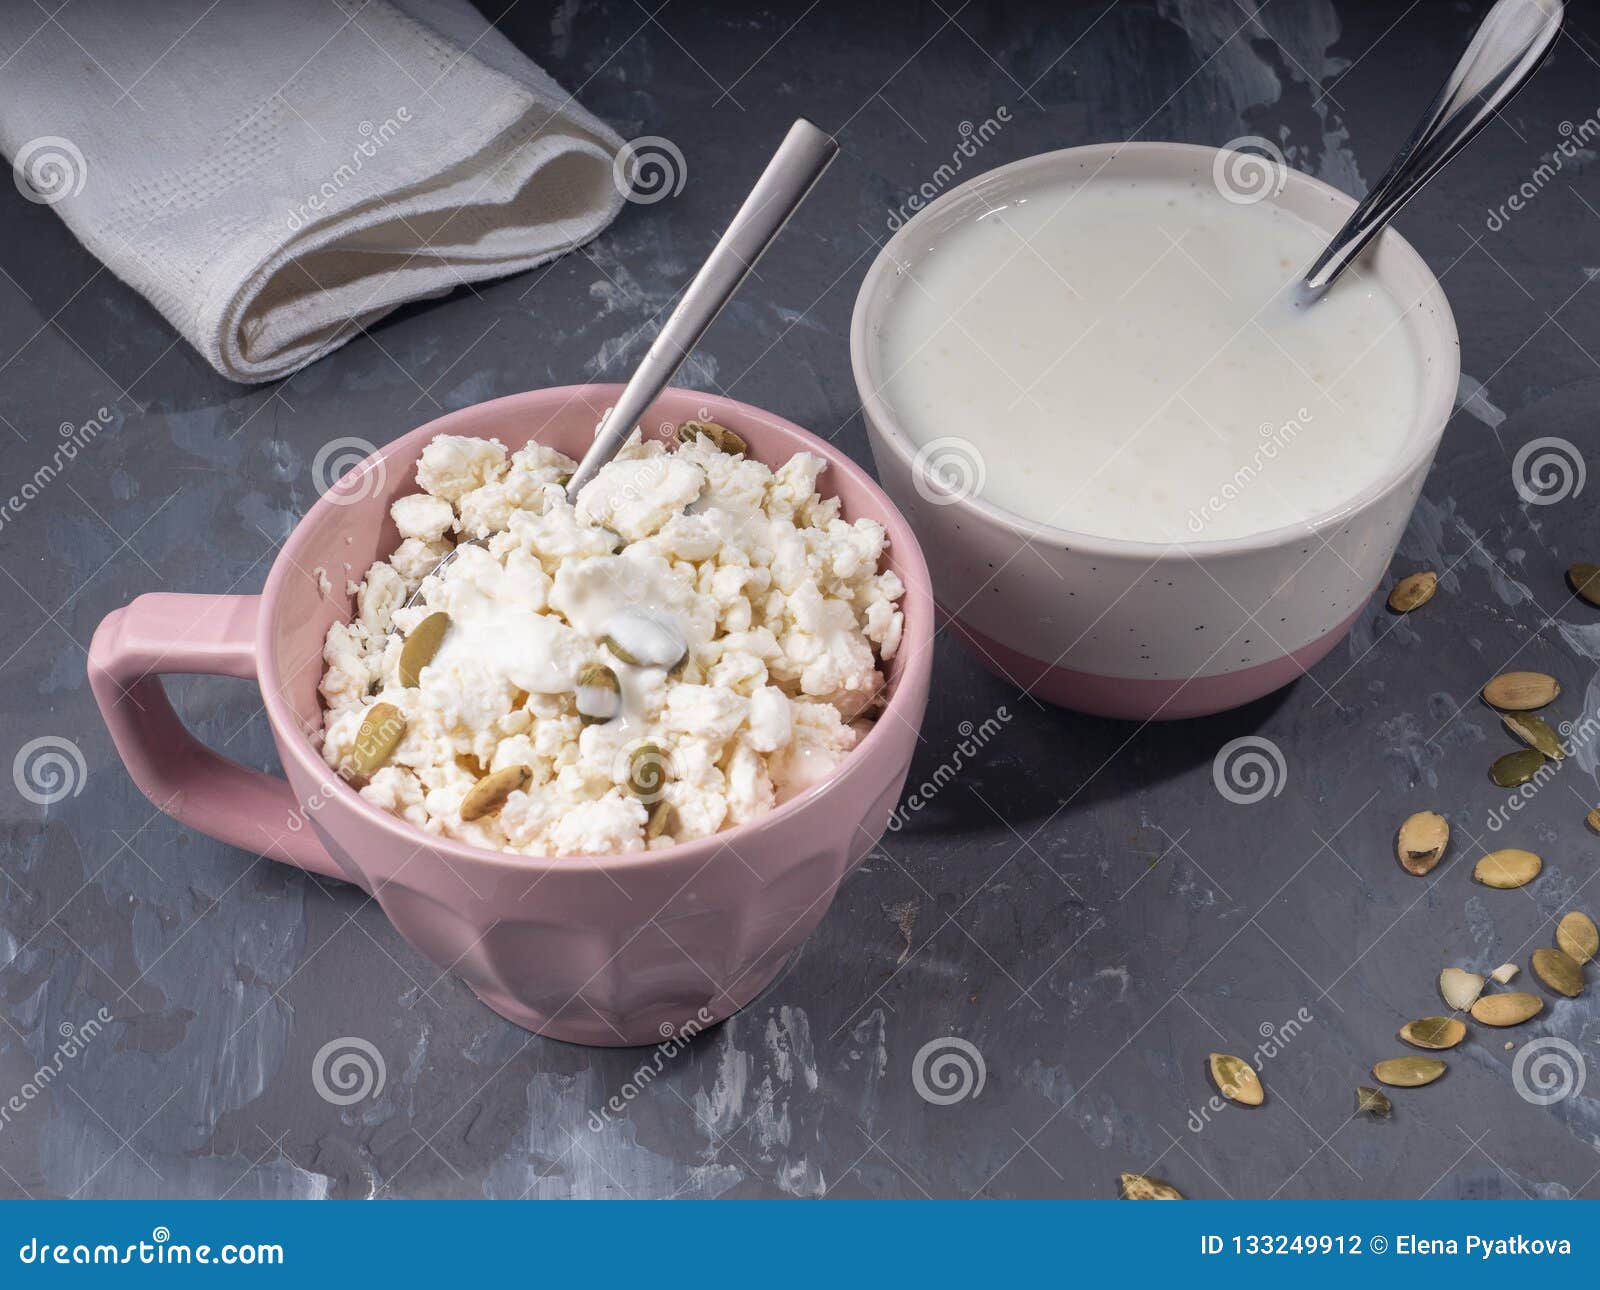 Light Breakfast Made Of Cottage Cheese And Sour Cream In Pink